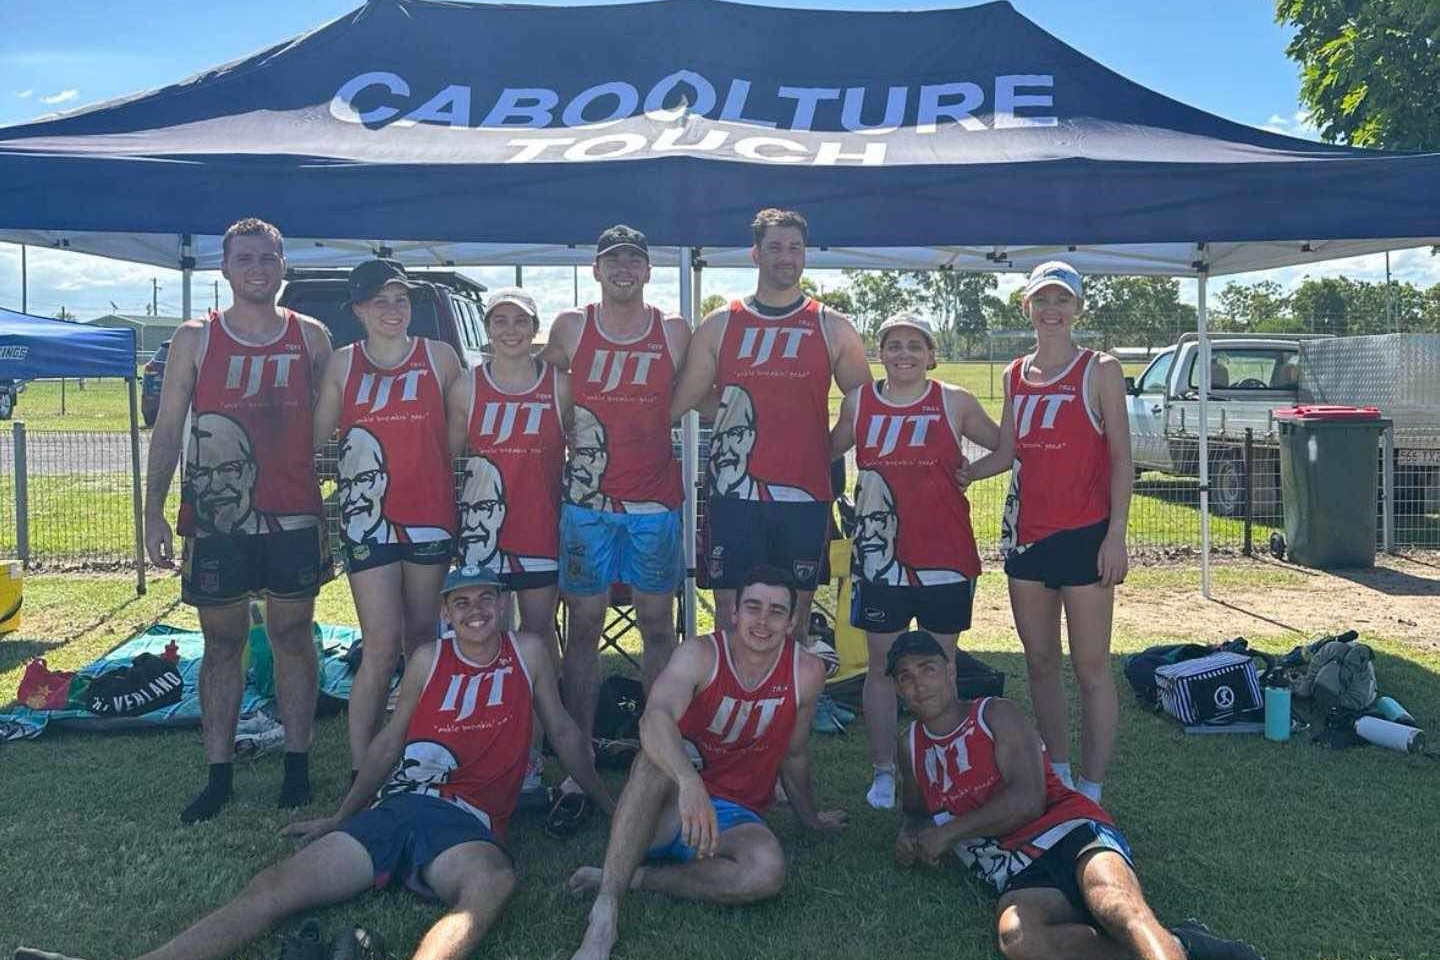 The Caboolture touch football team, named It’s Just Touch, finished runner-up in the Social Mixed division in the Bundaberg Cup.